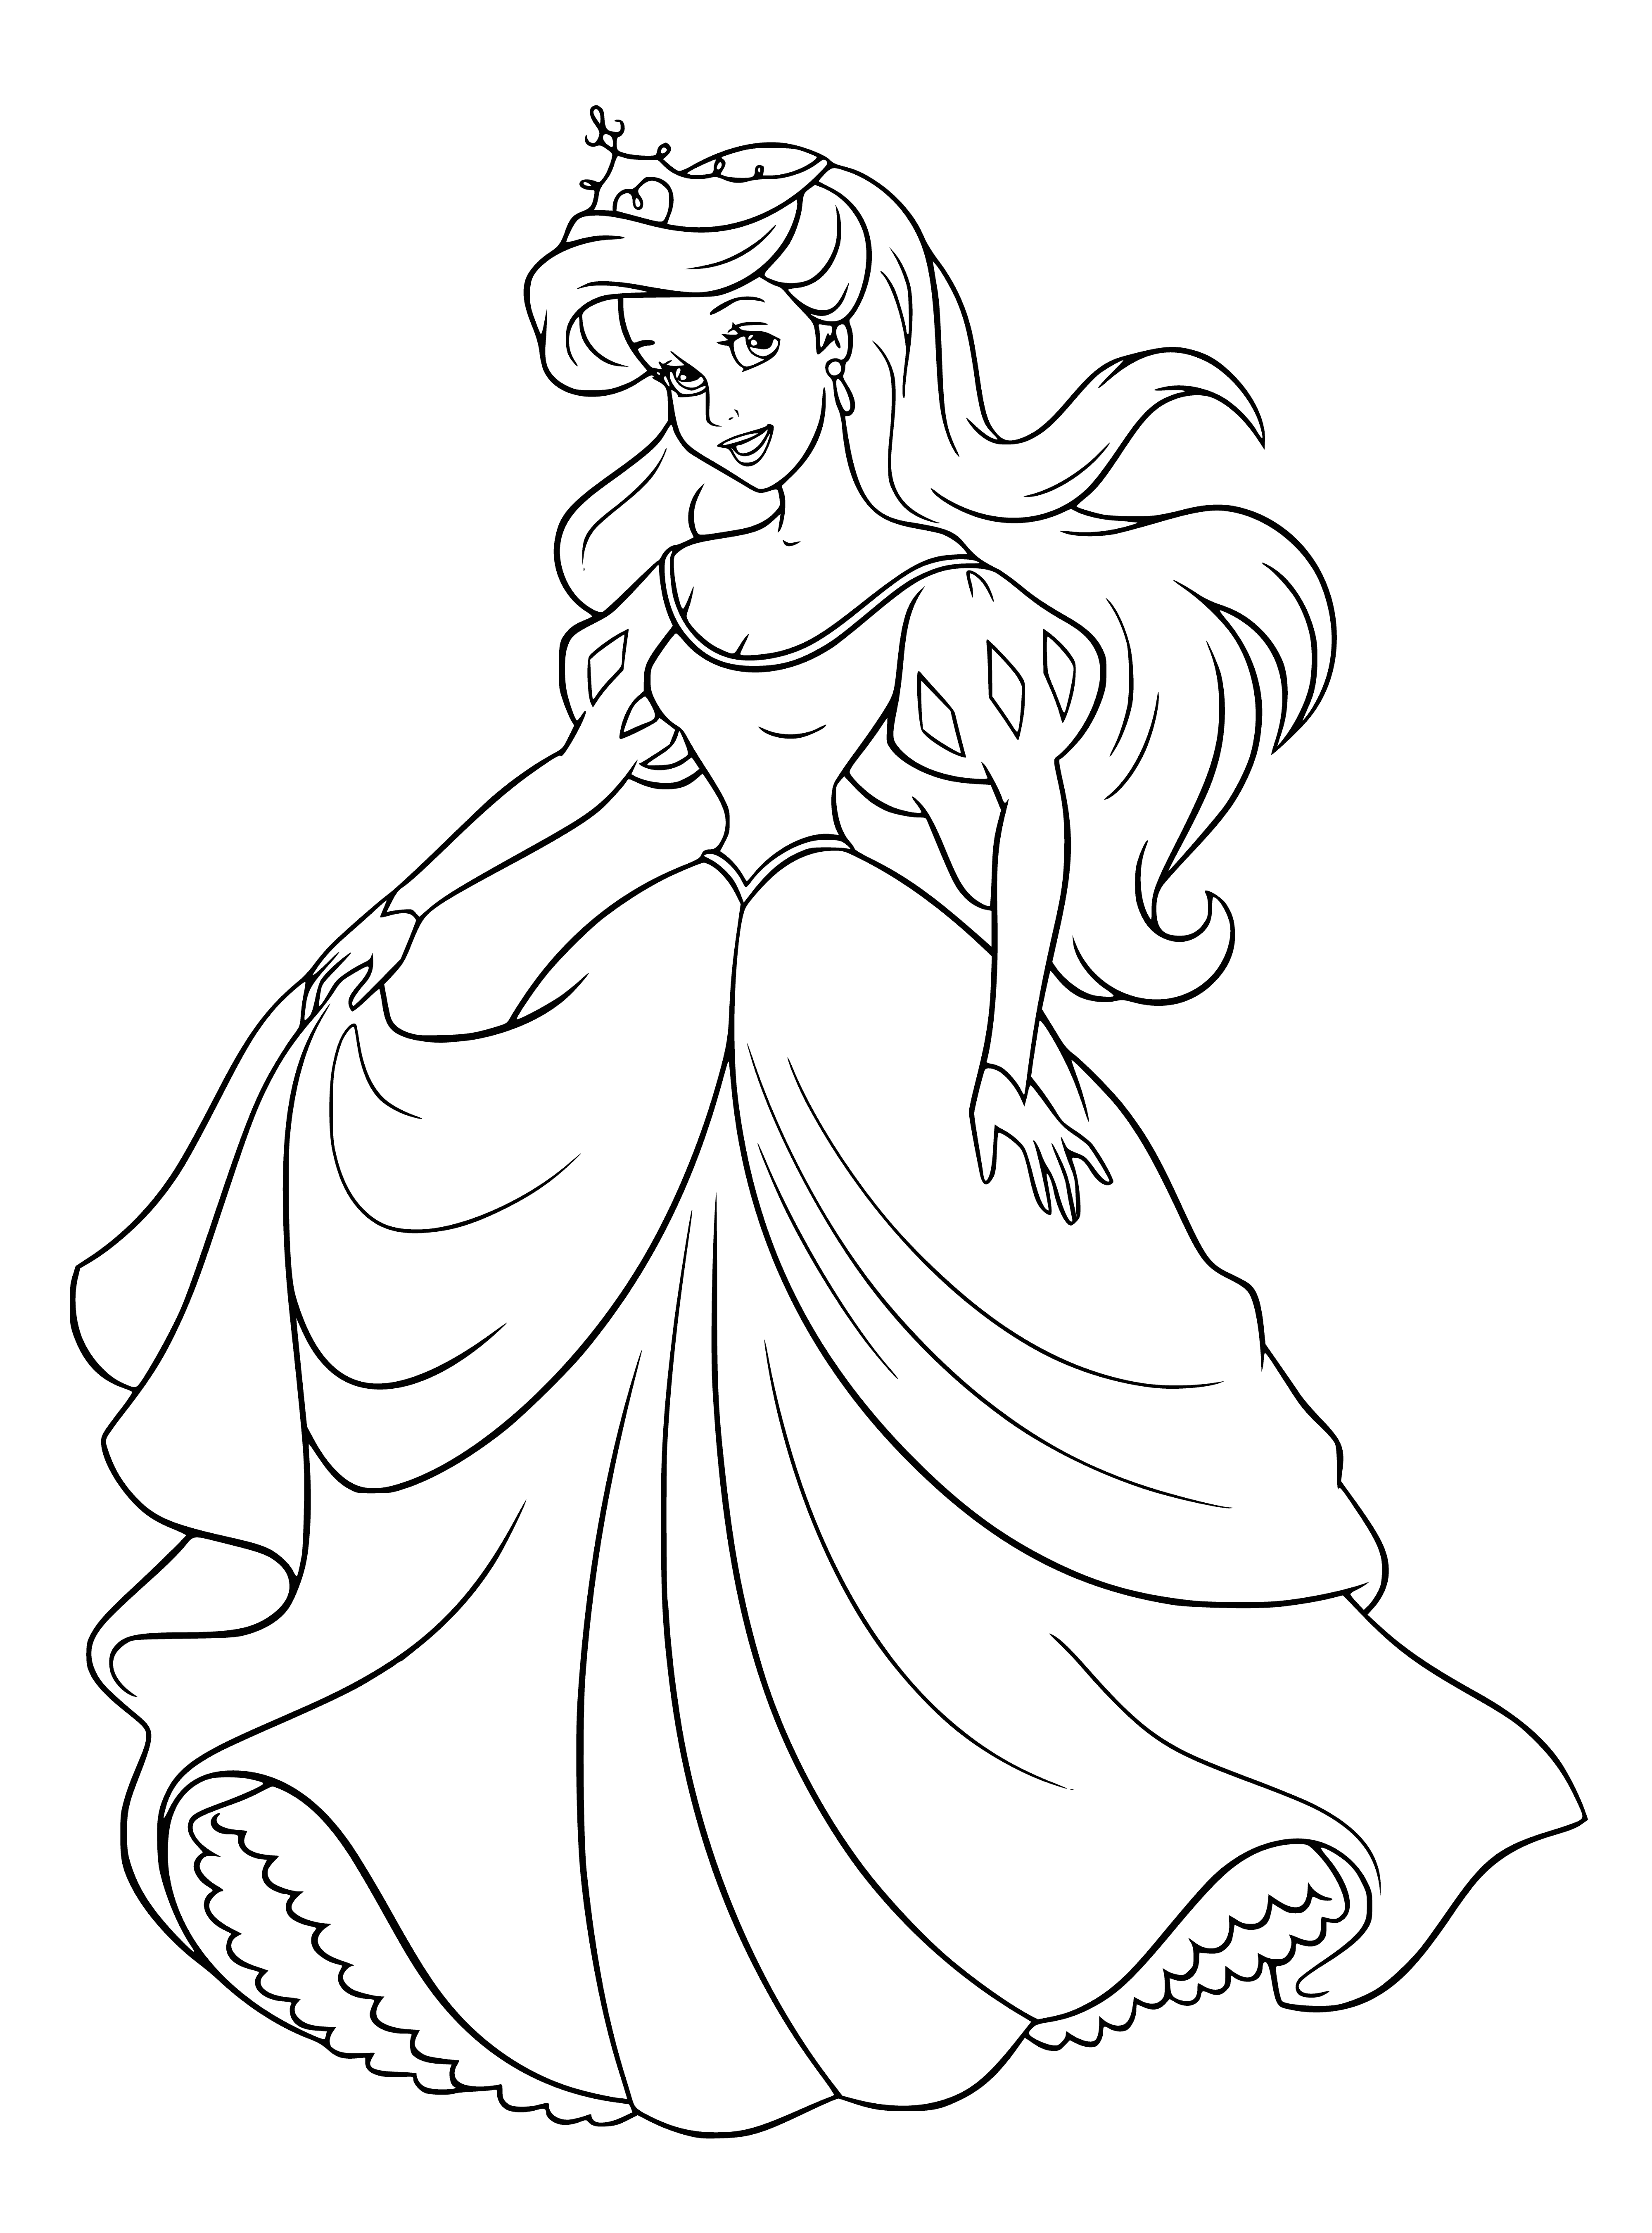 coloring page: Mermaid Ariel stands on a rock in an underwater scene, holding a pink conch shell to her ear with a curious expression. #TheLittleMermaid